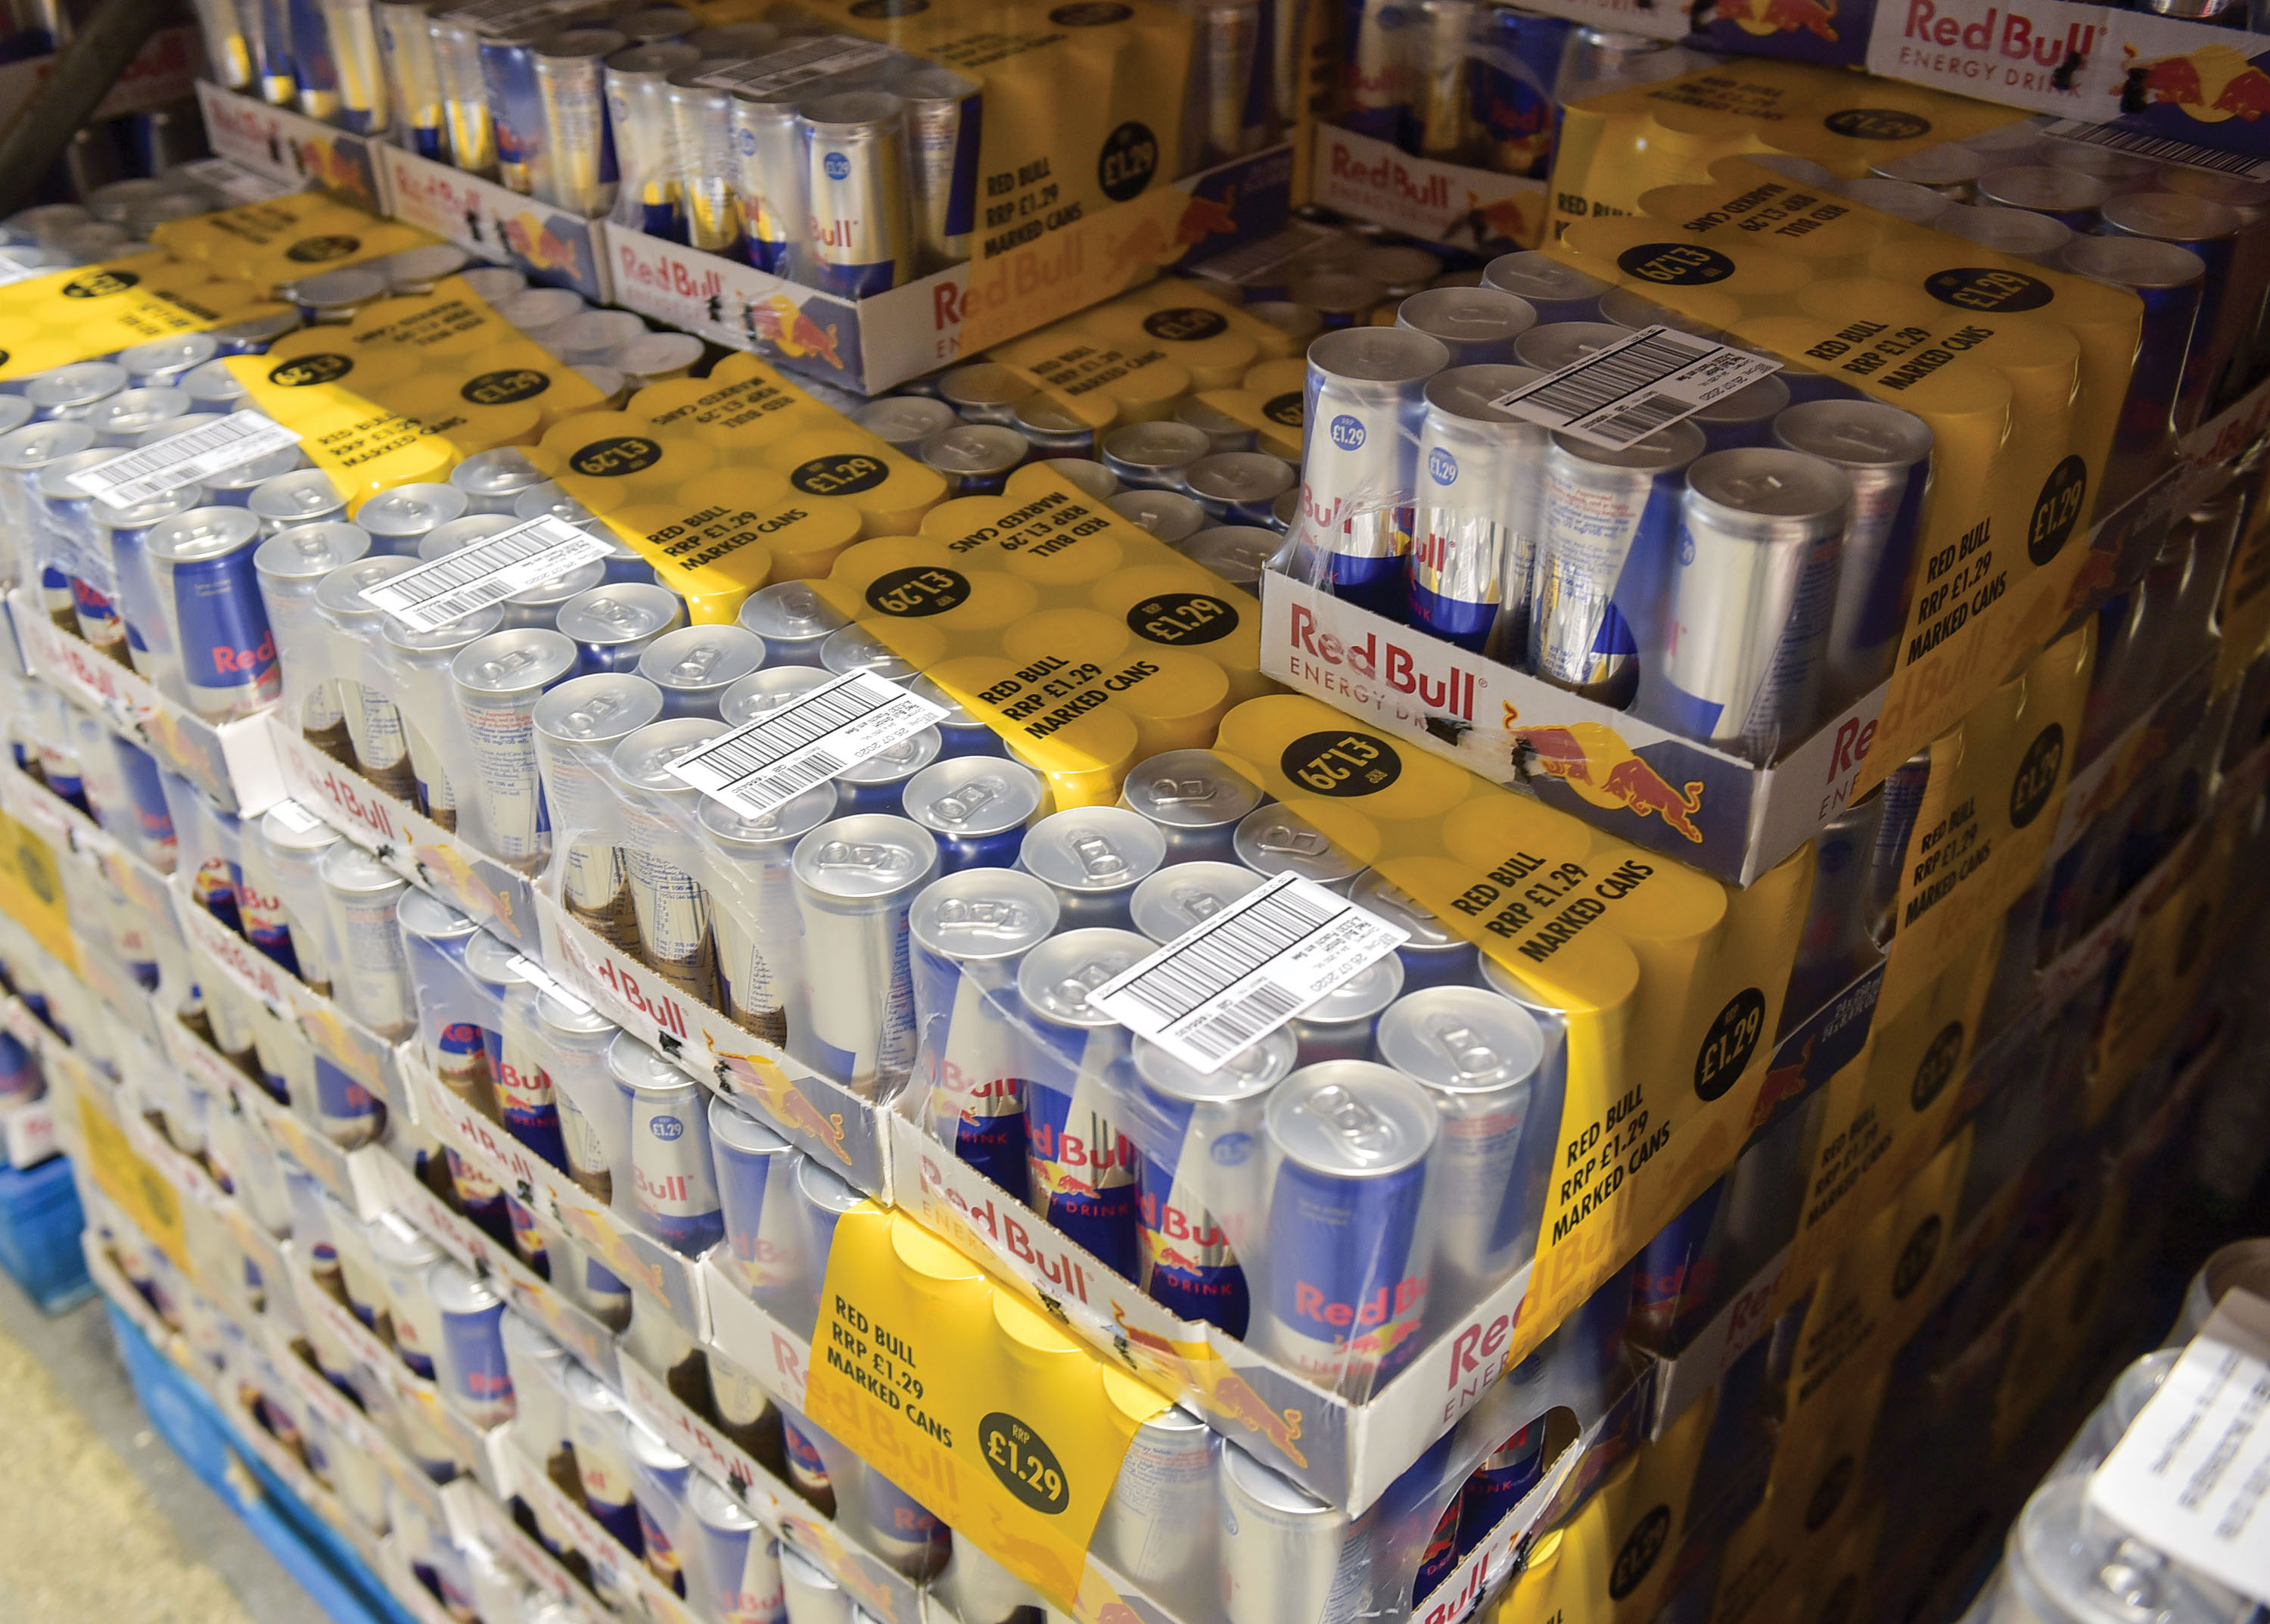 The Red Bull range on display at Dee Bee